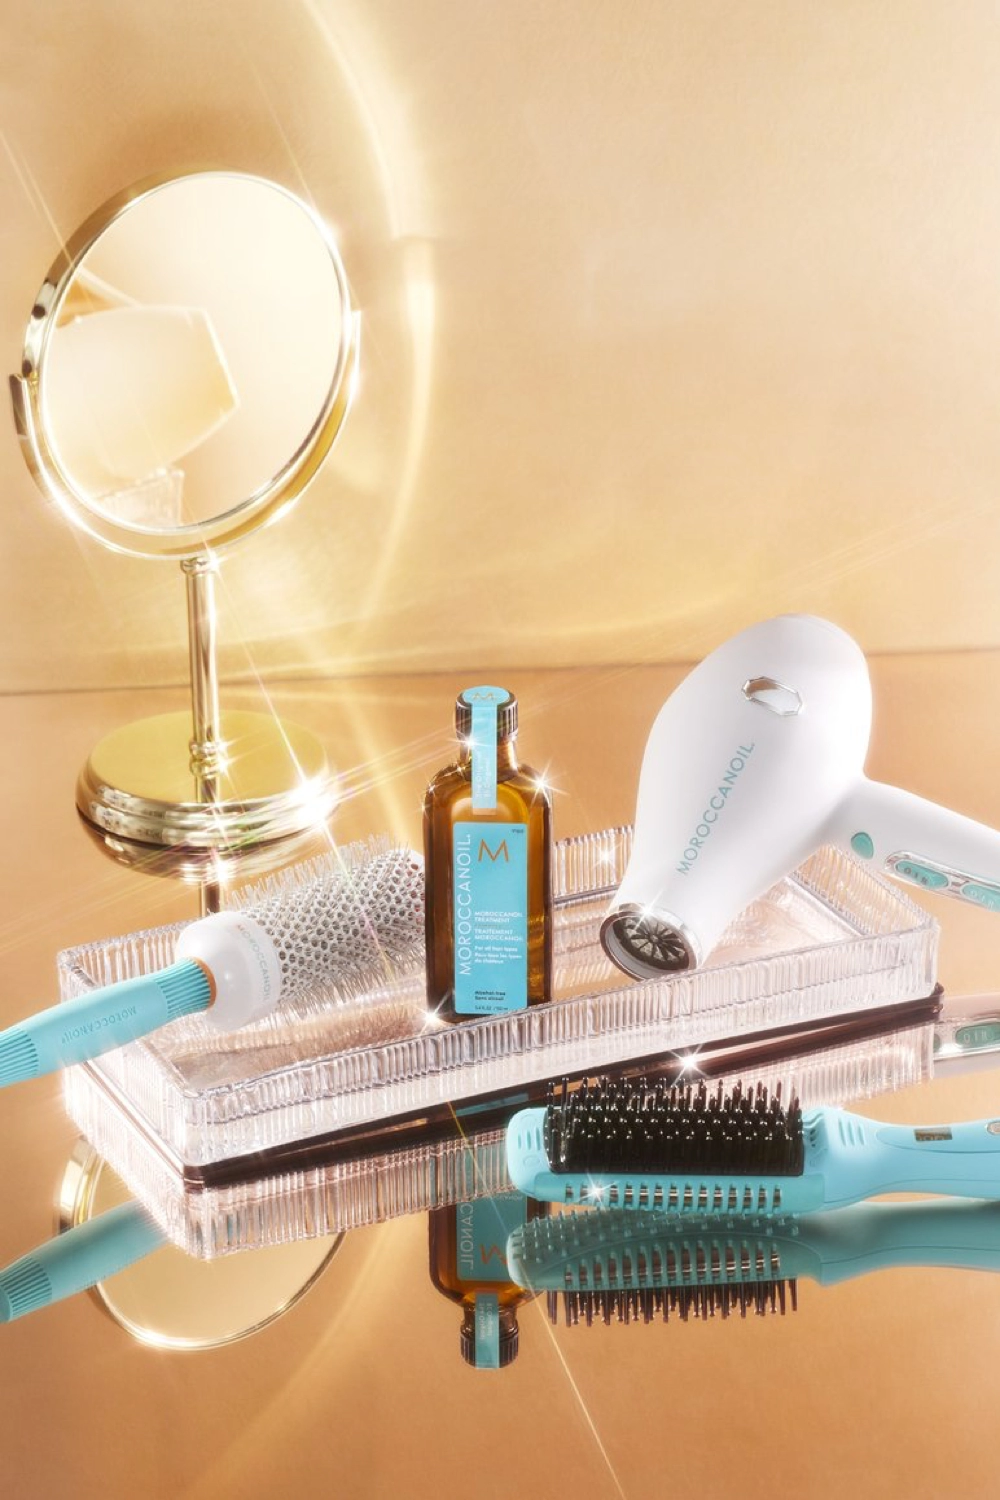 This is an image of Moroccan Oil products. 